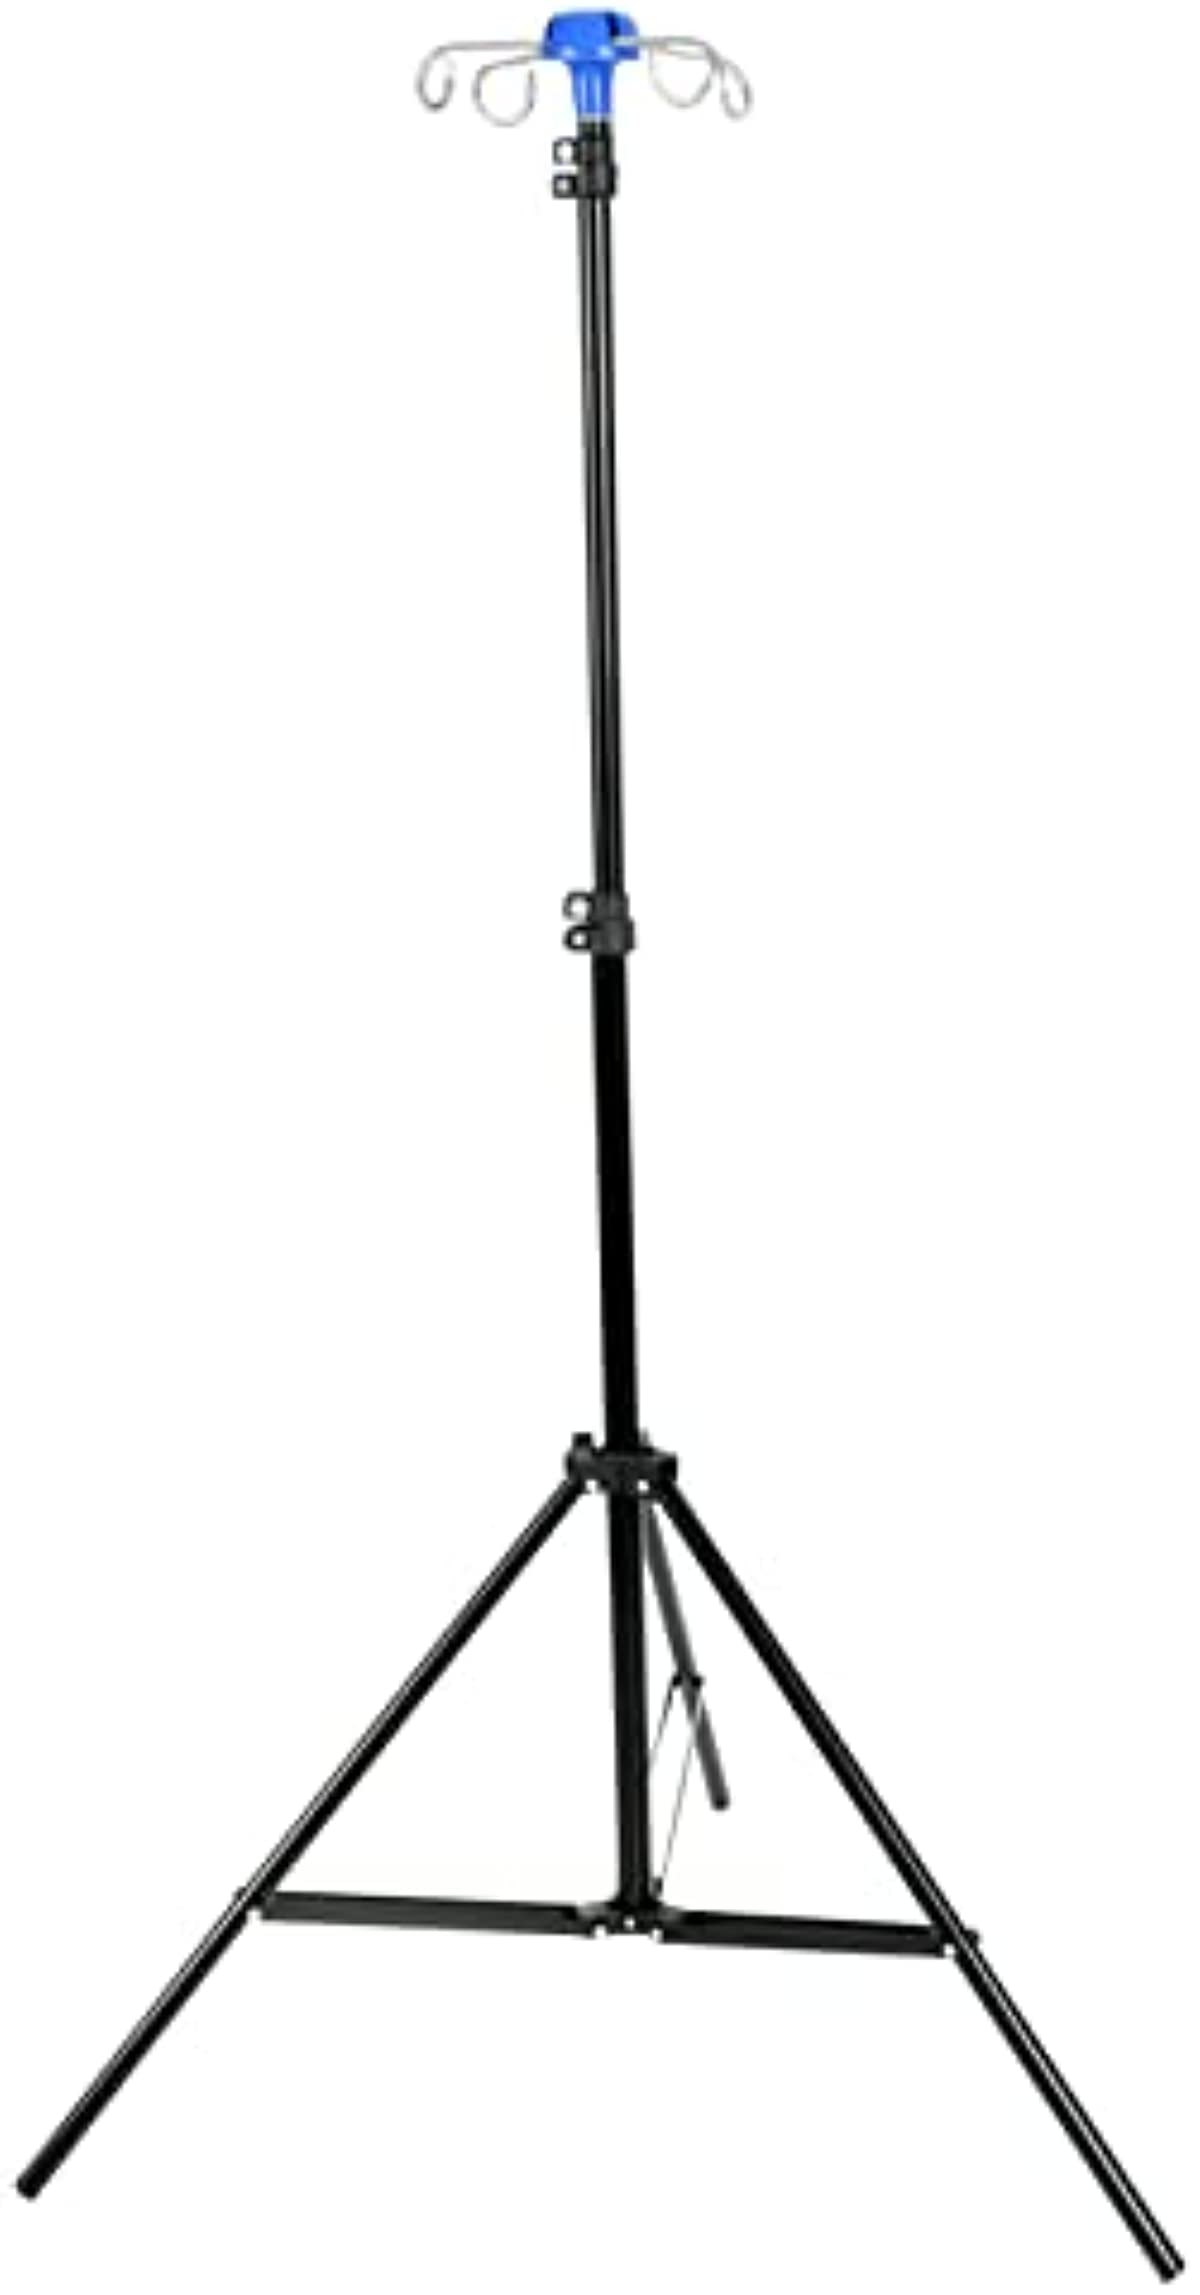 GSCDJCM Portable Collapsible IV Pole Stand, Aluminum Alloy, 4 Hook 3 Leg, Adjustable Height ，for Hospitals, Clinics, Wheelchairs and Beds